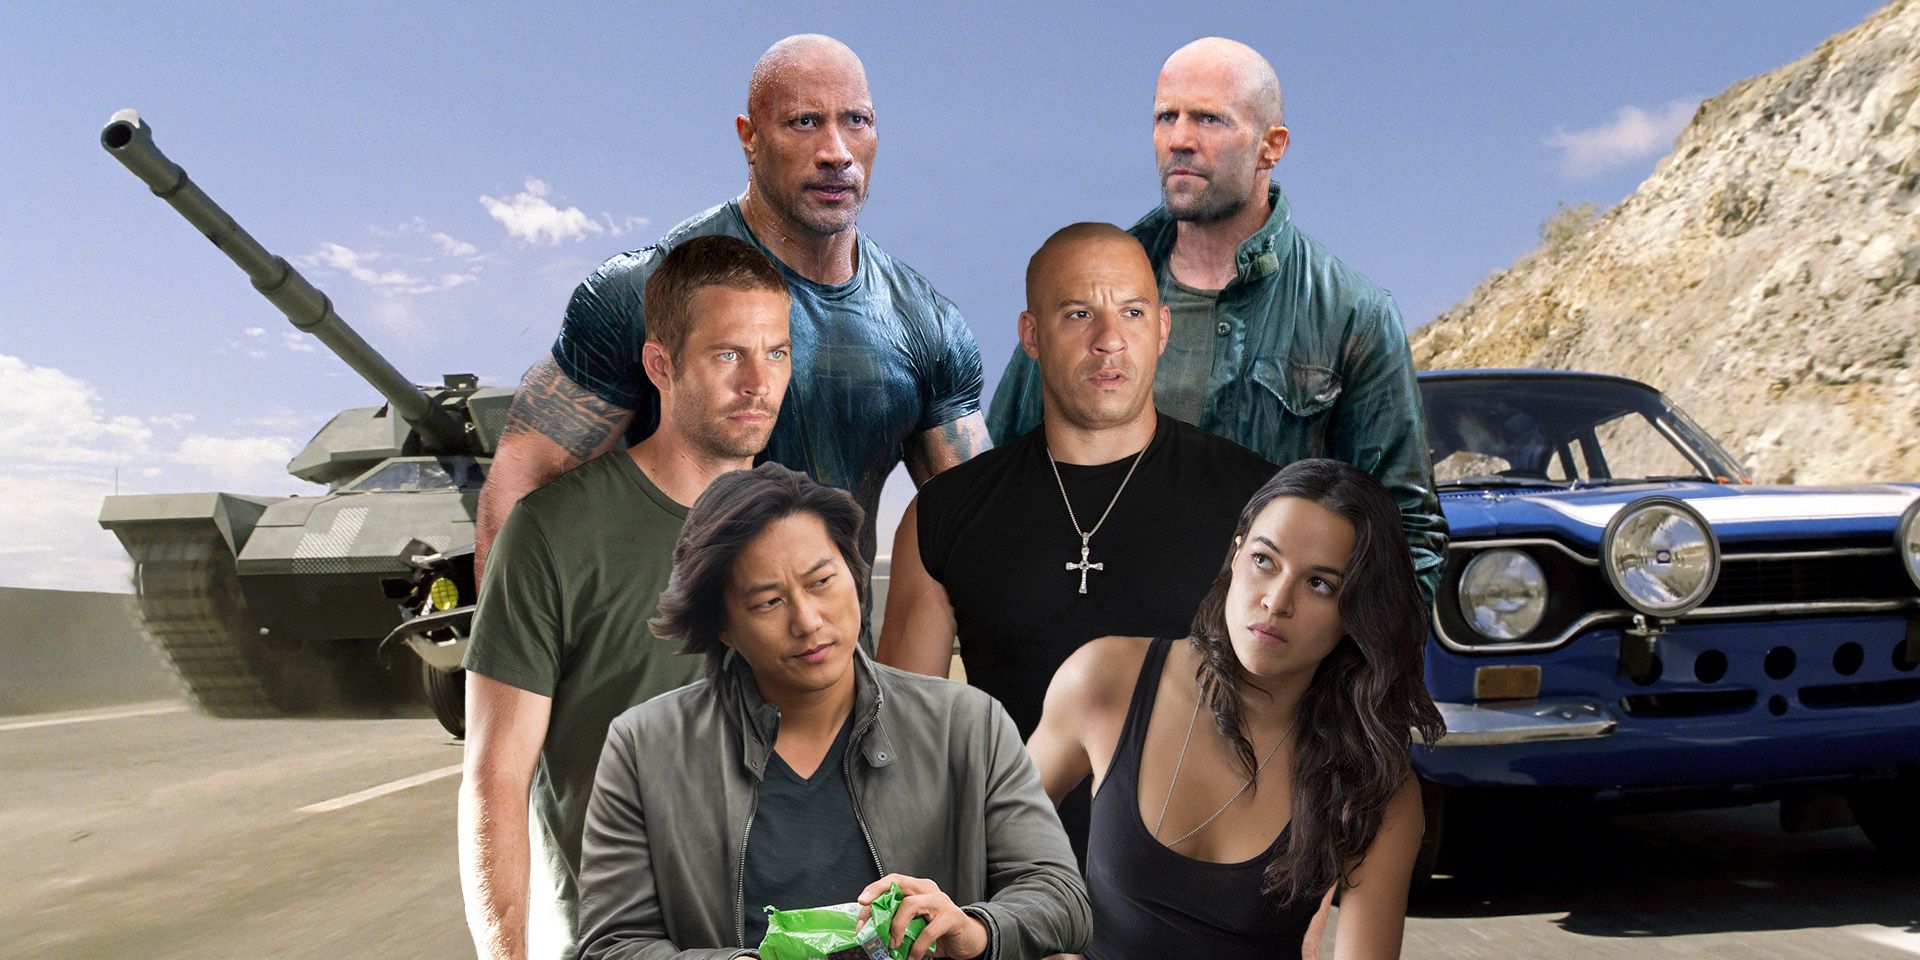 How To Watch The Fast And Furious Movies In Order